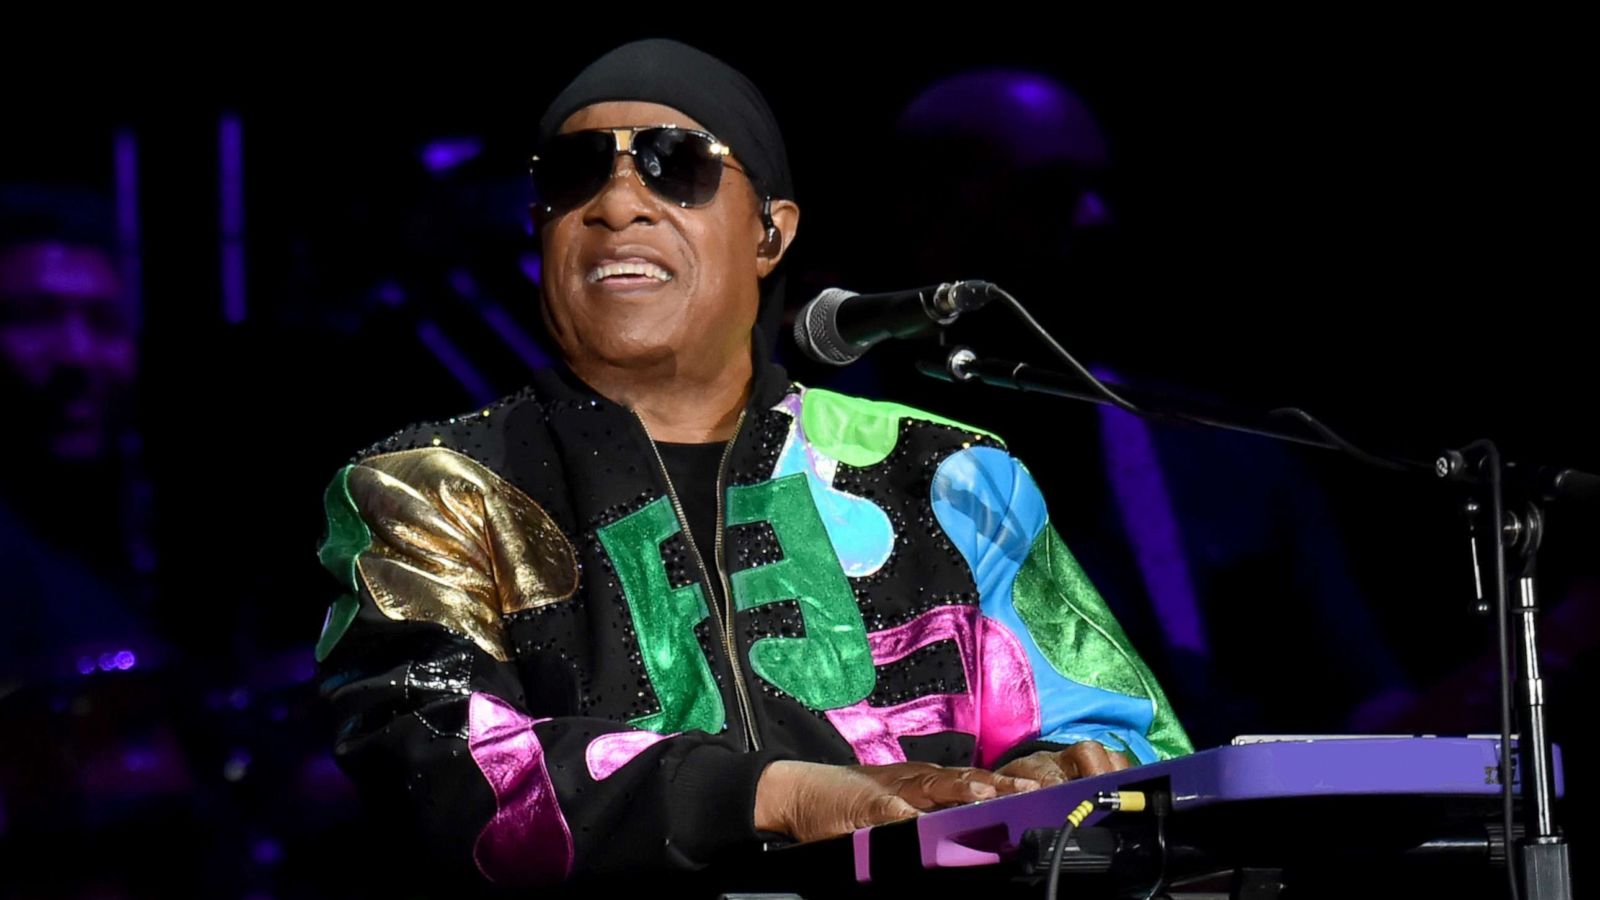 PHOTO: In this July 6, 2019, file photo, Stevie Wonder performs on Day 2 of Barclaycard Presents British Summer Time Hyde Park at Hyde Park in London.